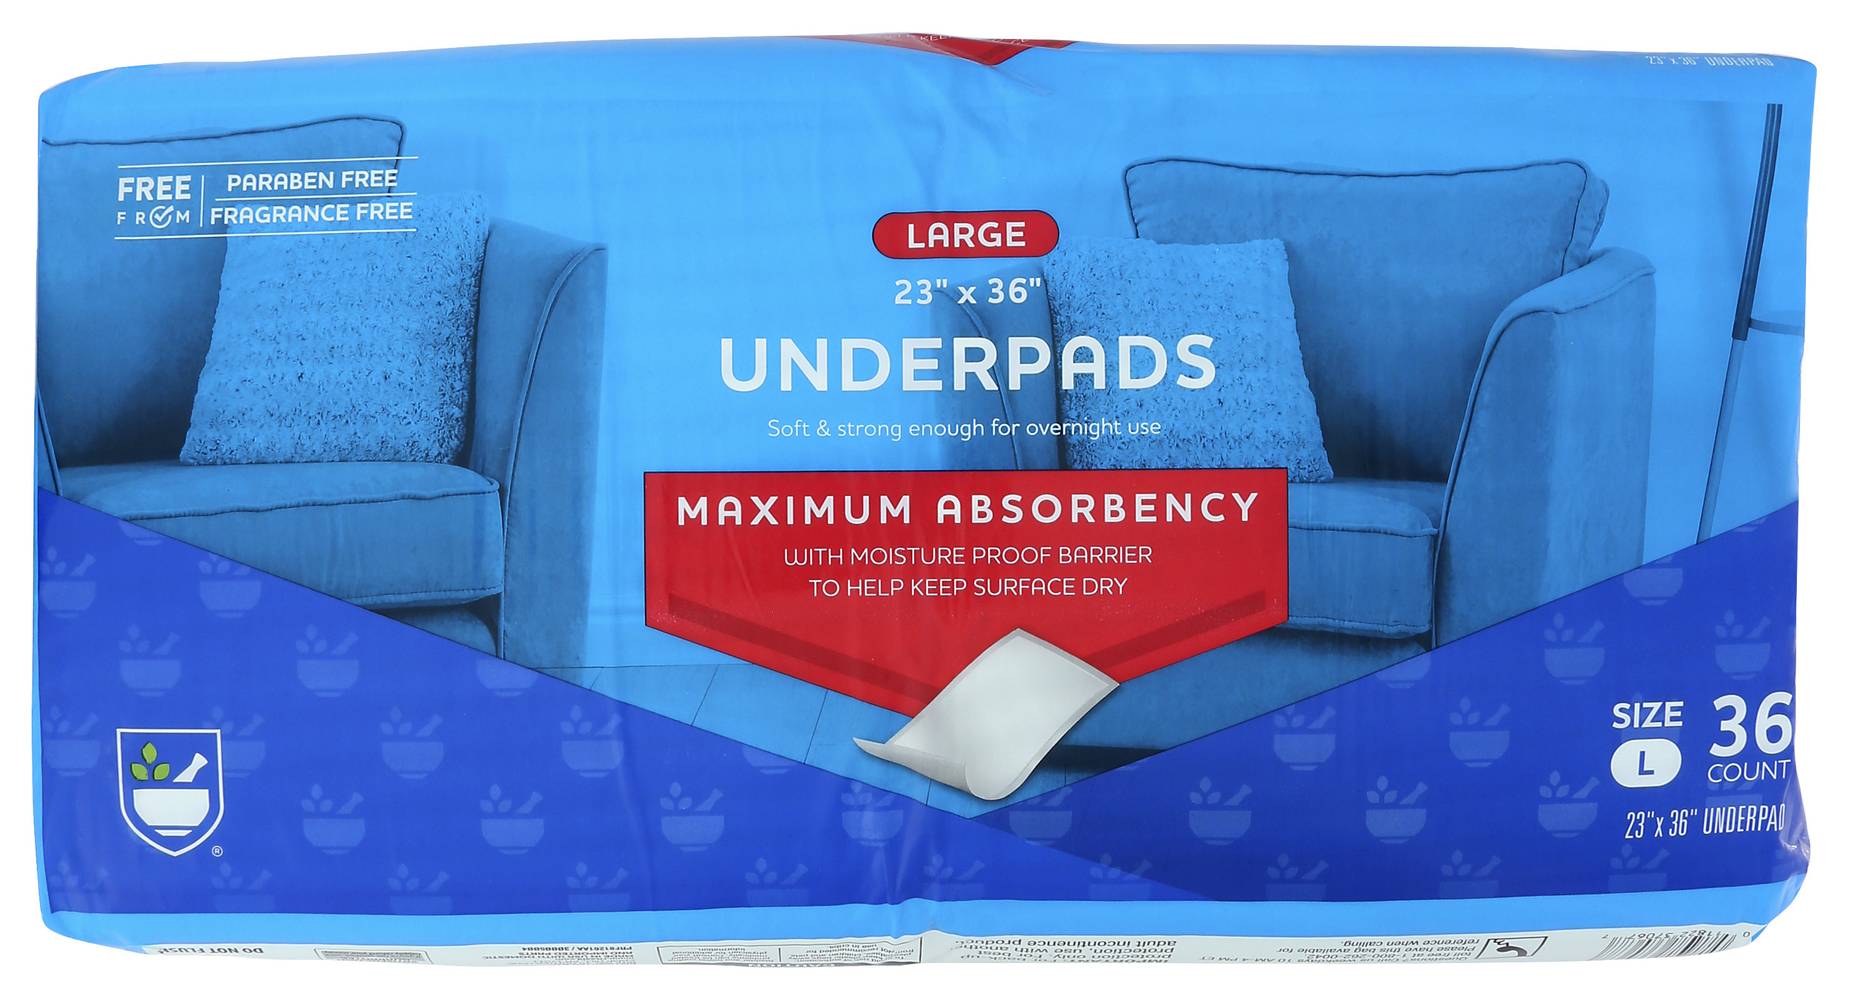 Rite Aid Maximum Absorbency Underpads For Men and Women (large- 23" * 36")